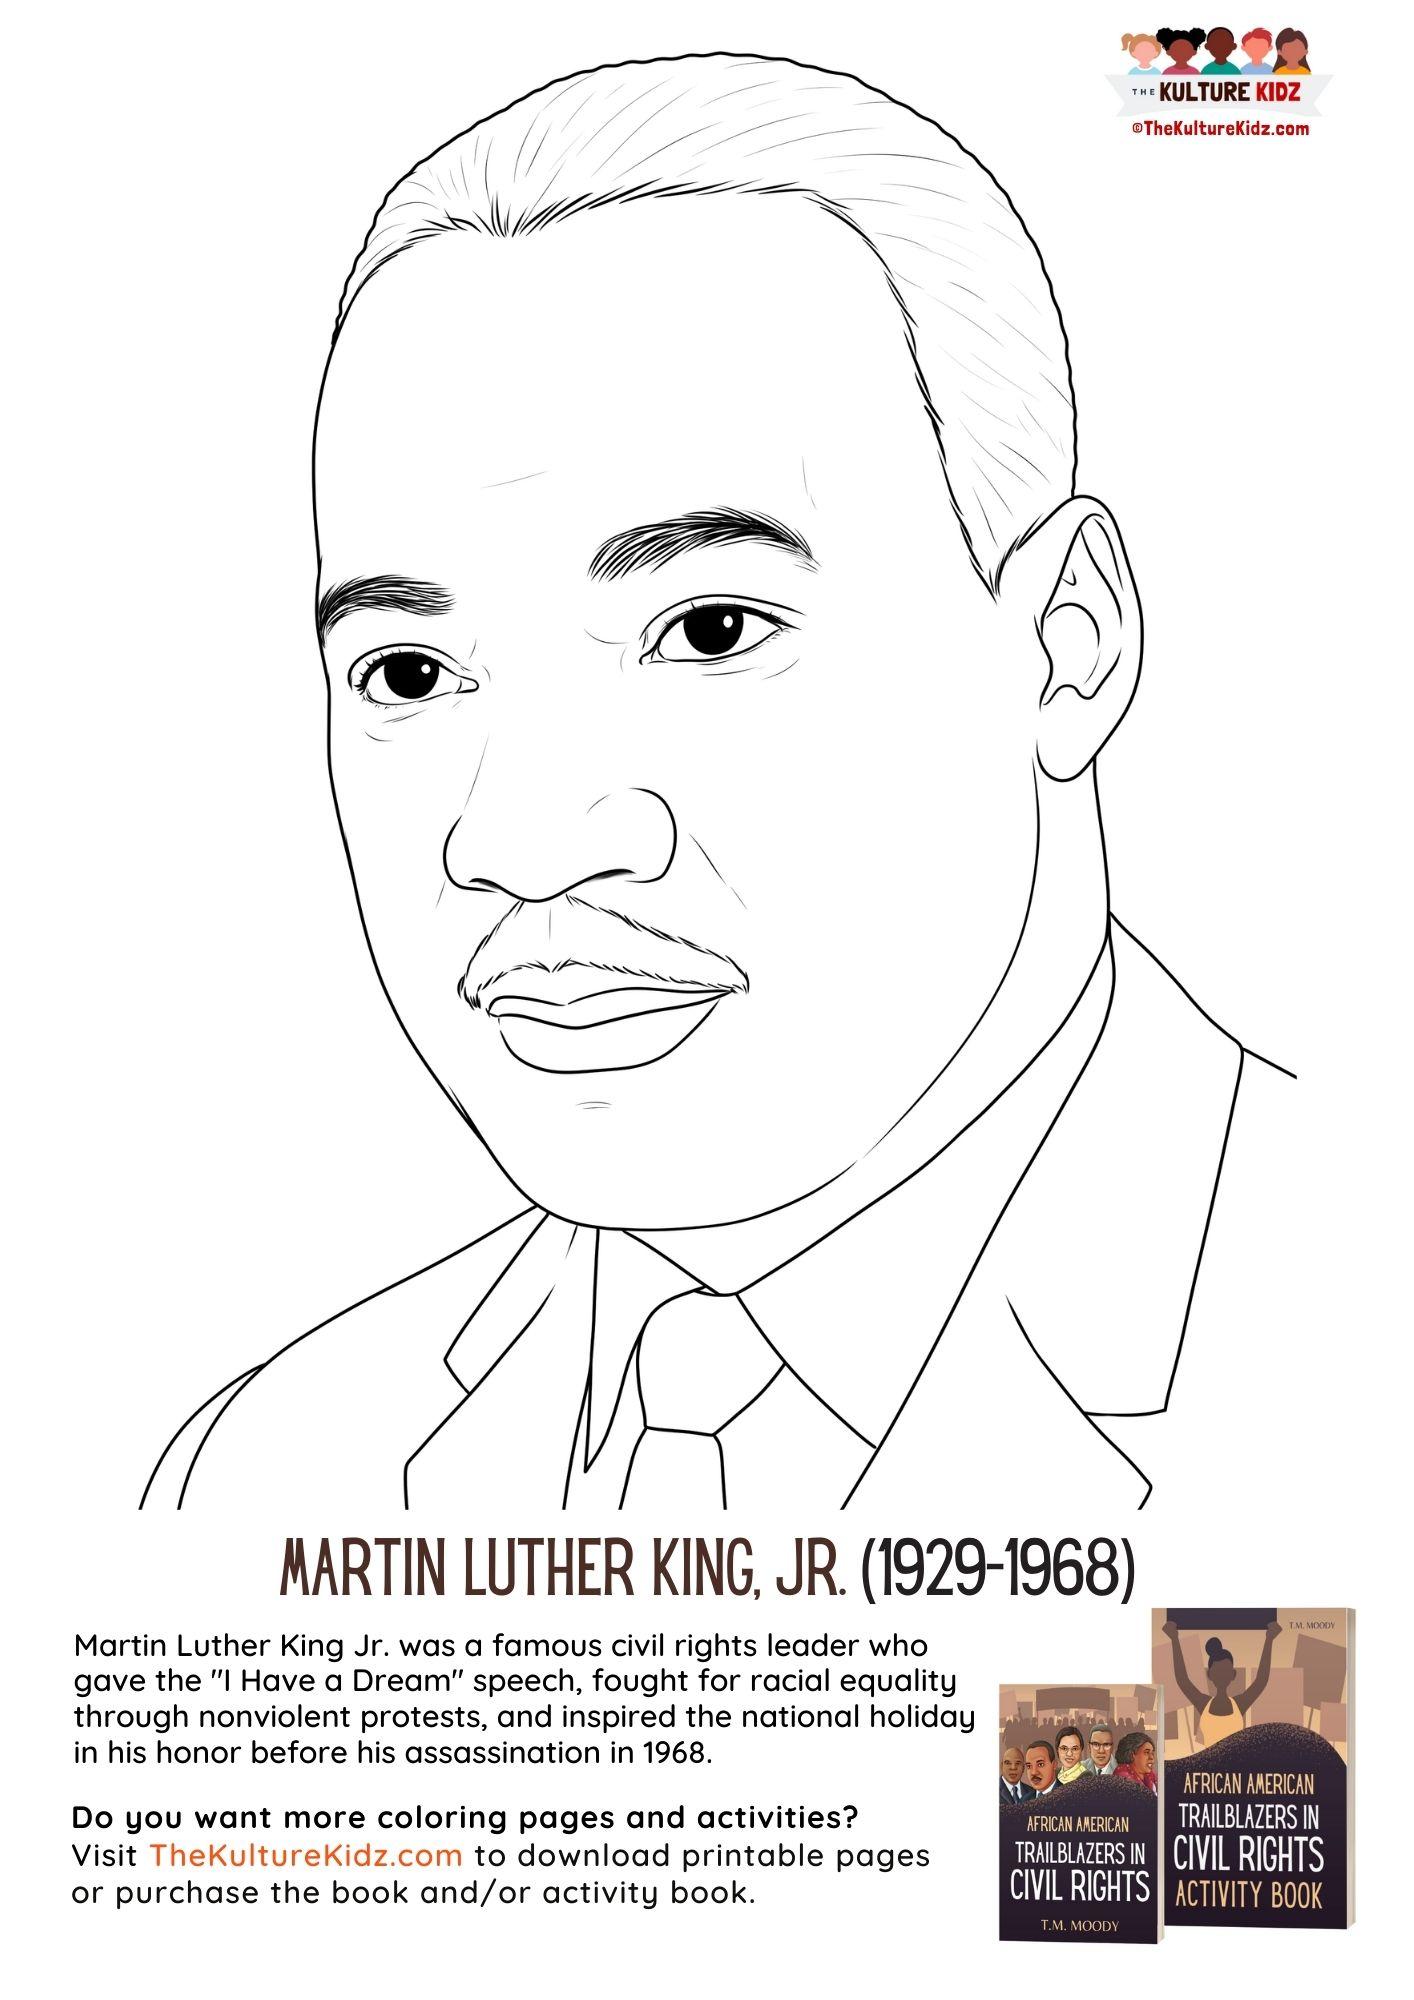 Martin Luther King Jr Coloring Page – The Kulture Kidz